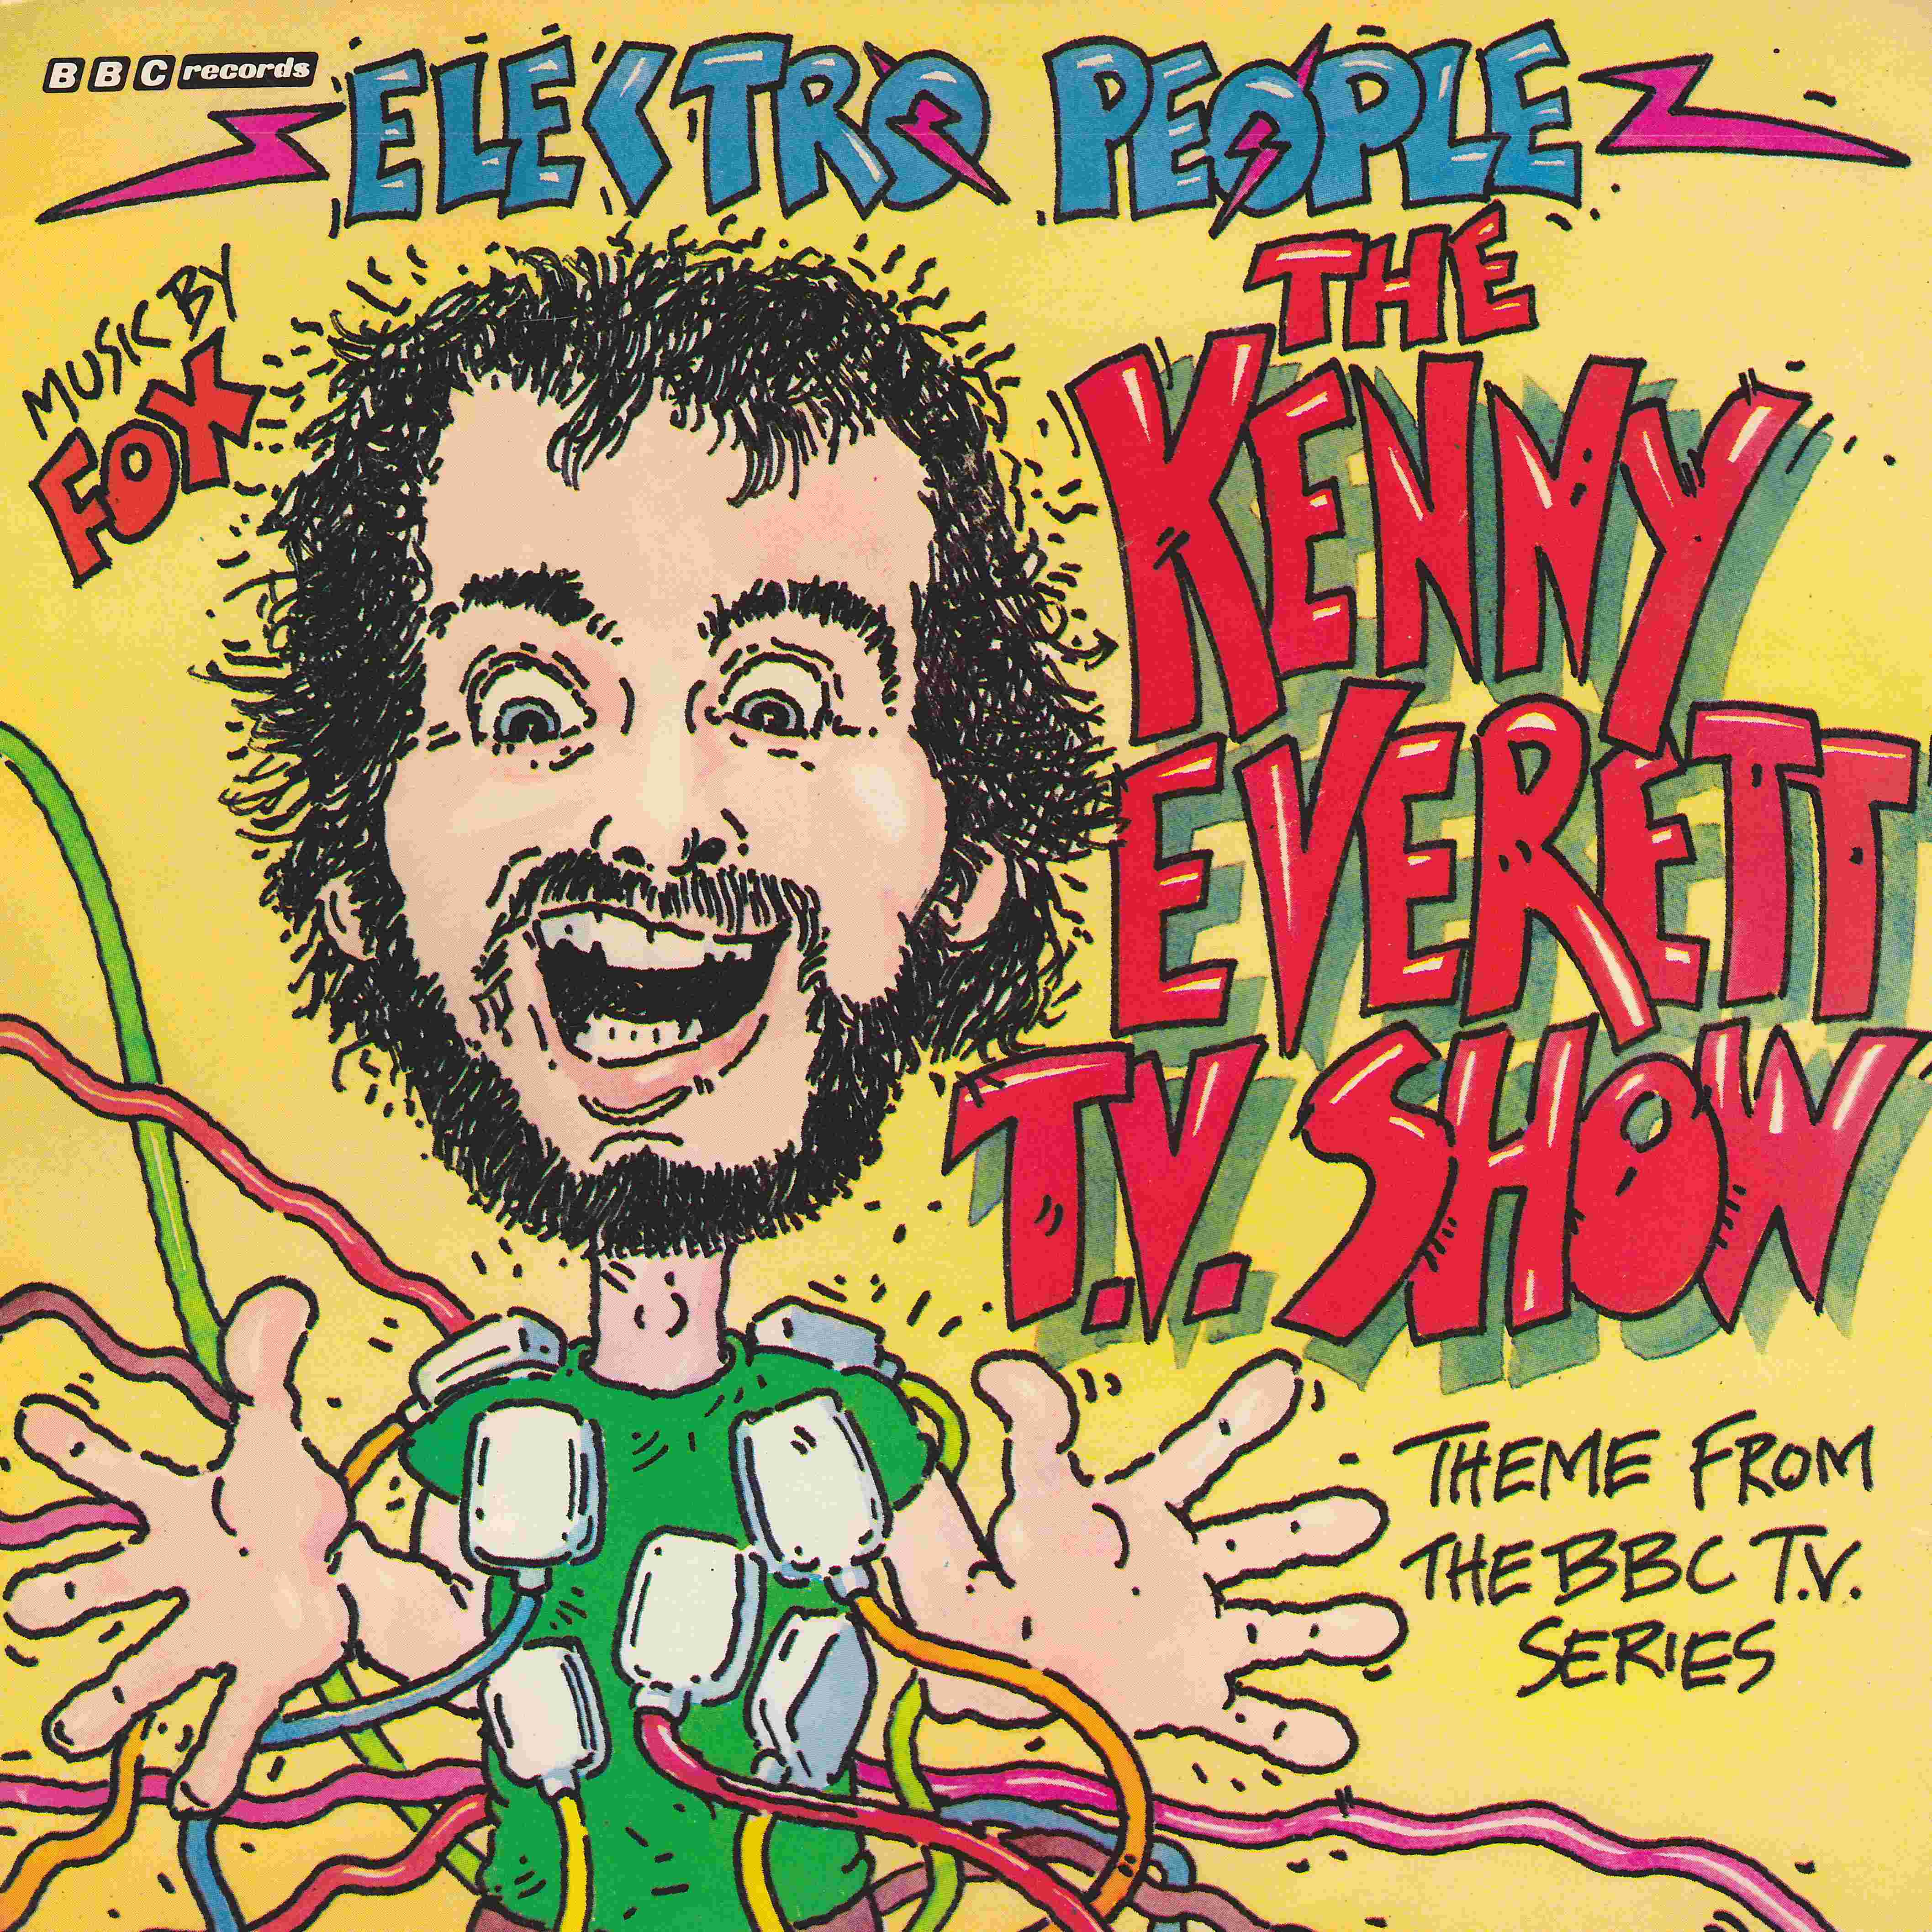 Picture of RESL 115 Electro people (The Kenny Everett television show) by artist Kenny Young / Fox from the BBC singles - Records and Tapes library